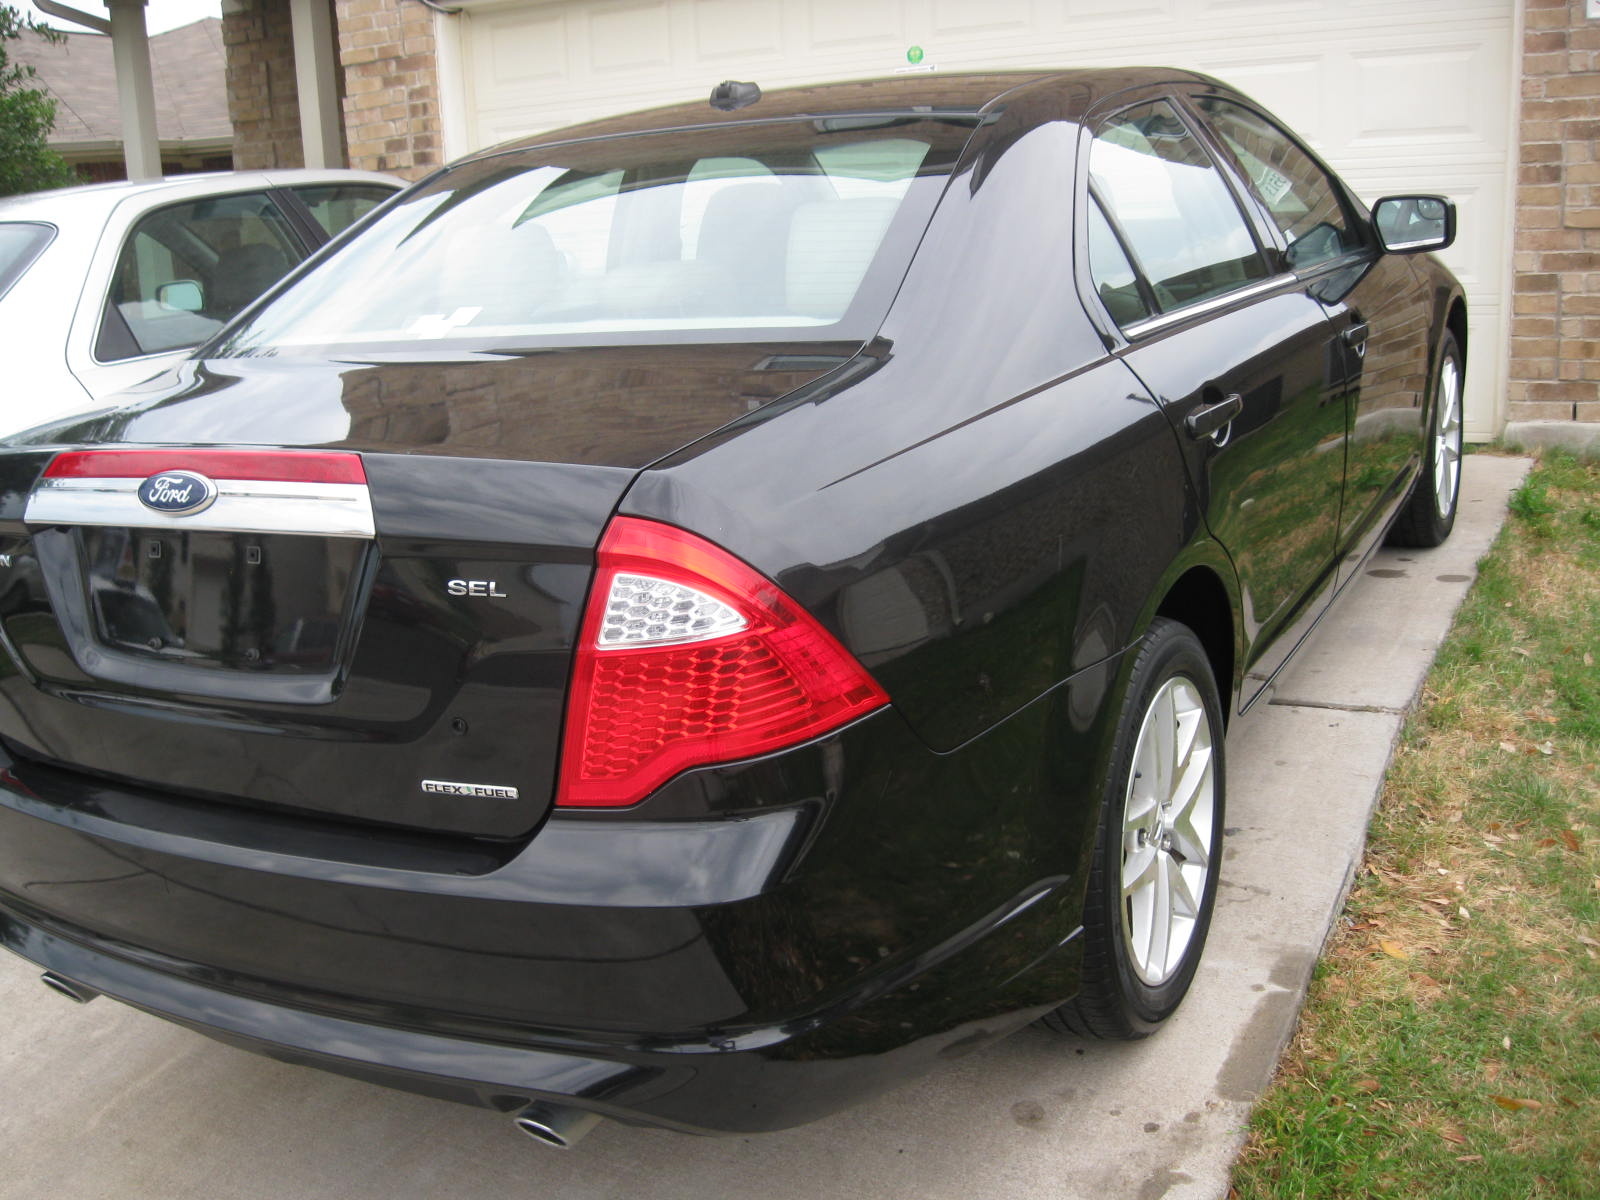 2011 Ford fusion resale value #1